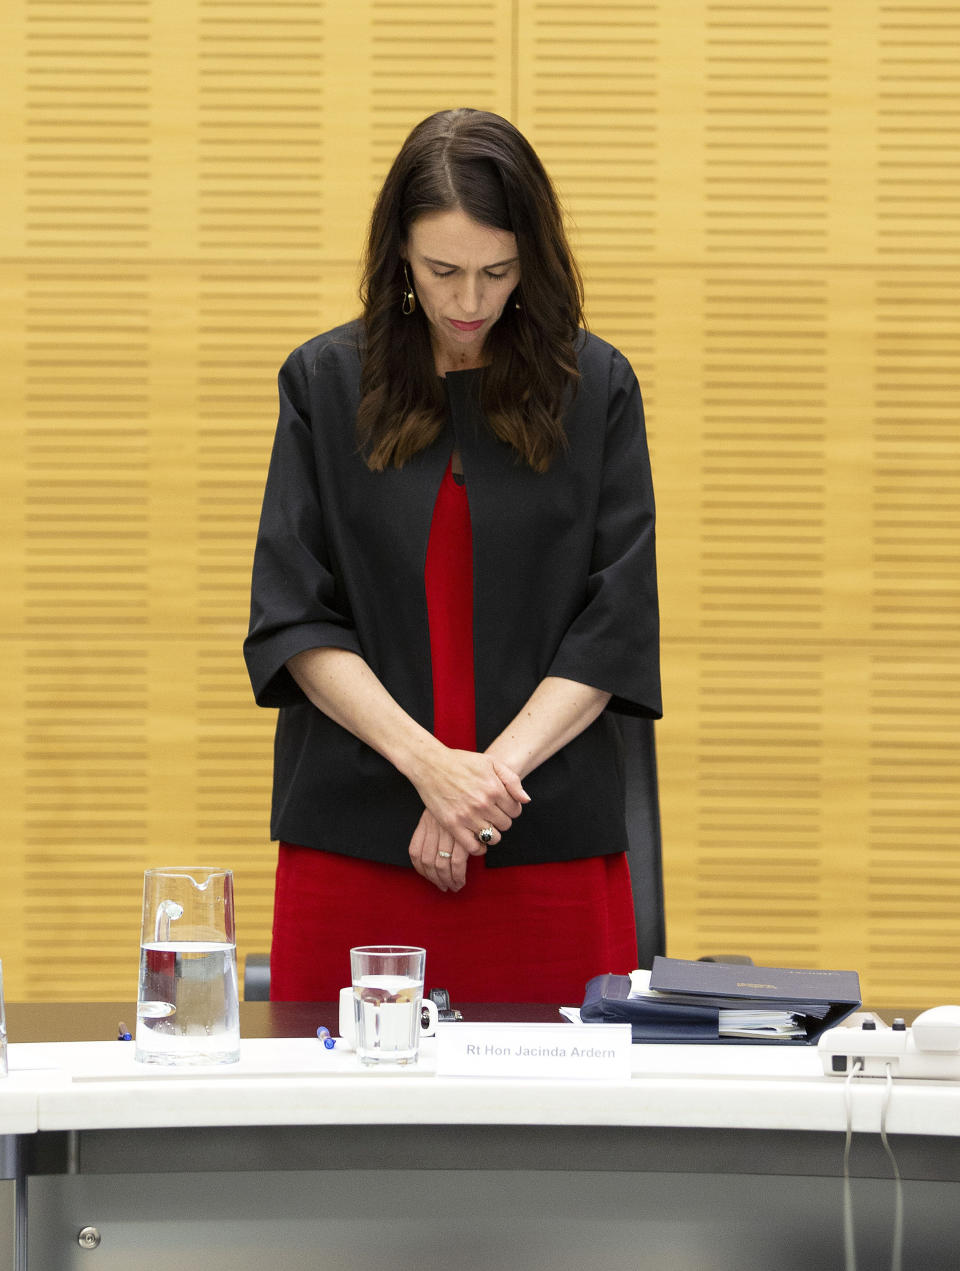 New Zealand Prime Minister Jacinda Ardern observes a moment of silence with her cabinet colleagues at the moment that a volcano erupted a week earlier, killing 18 people and leaving others with severe burns, in Wellington, New Zealand, Monday, Dec. 16, 2019. Ardern said that wherever people were in New Zealand or around the world, it was an opportunity to stand alongside those who had lost loved ones in the tragedy at White Island on Monday, Dec. 9. (Hagen Hopkins/Pool Photo via AP)